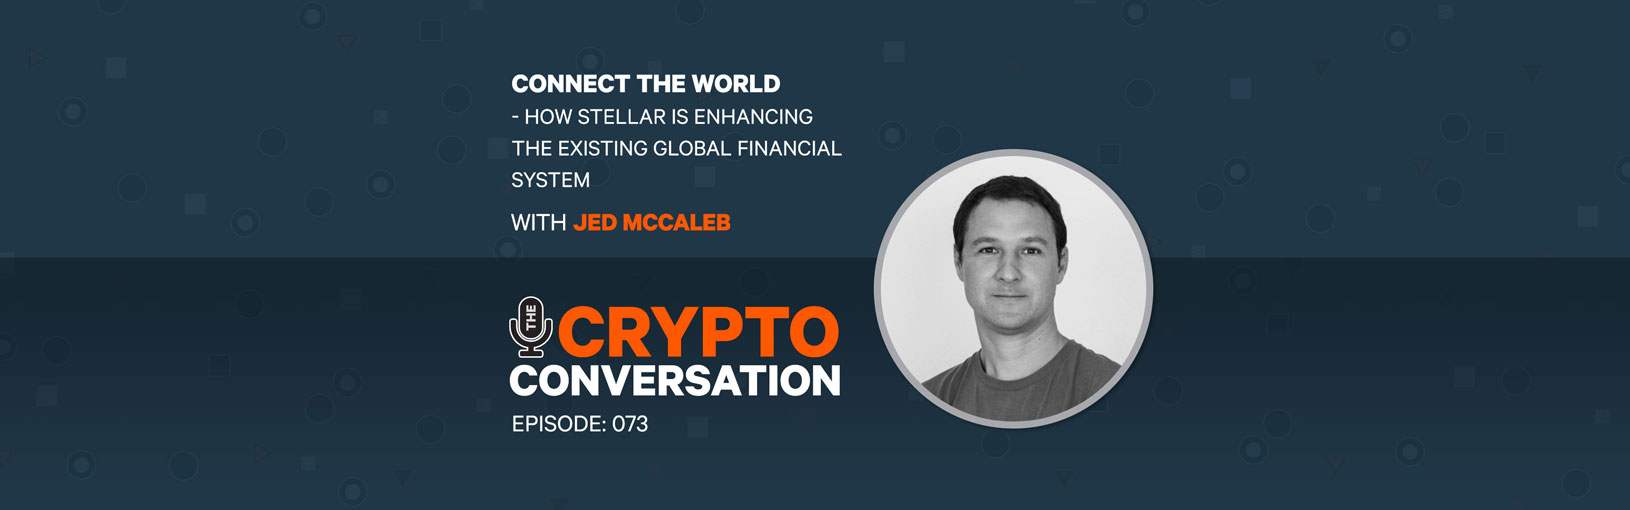 Connect the world – How Stellar is connecting the global financial system